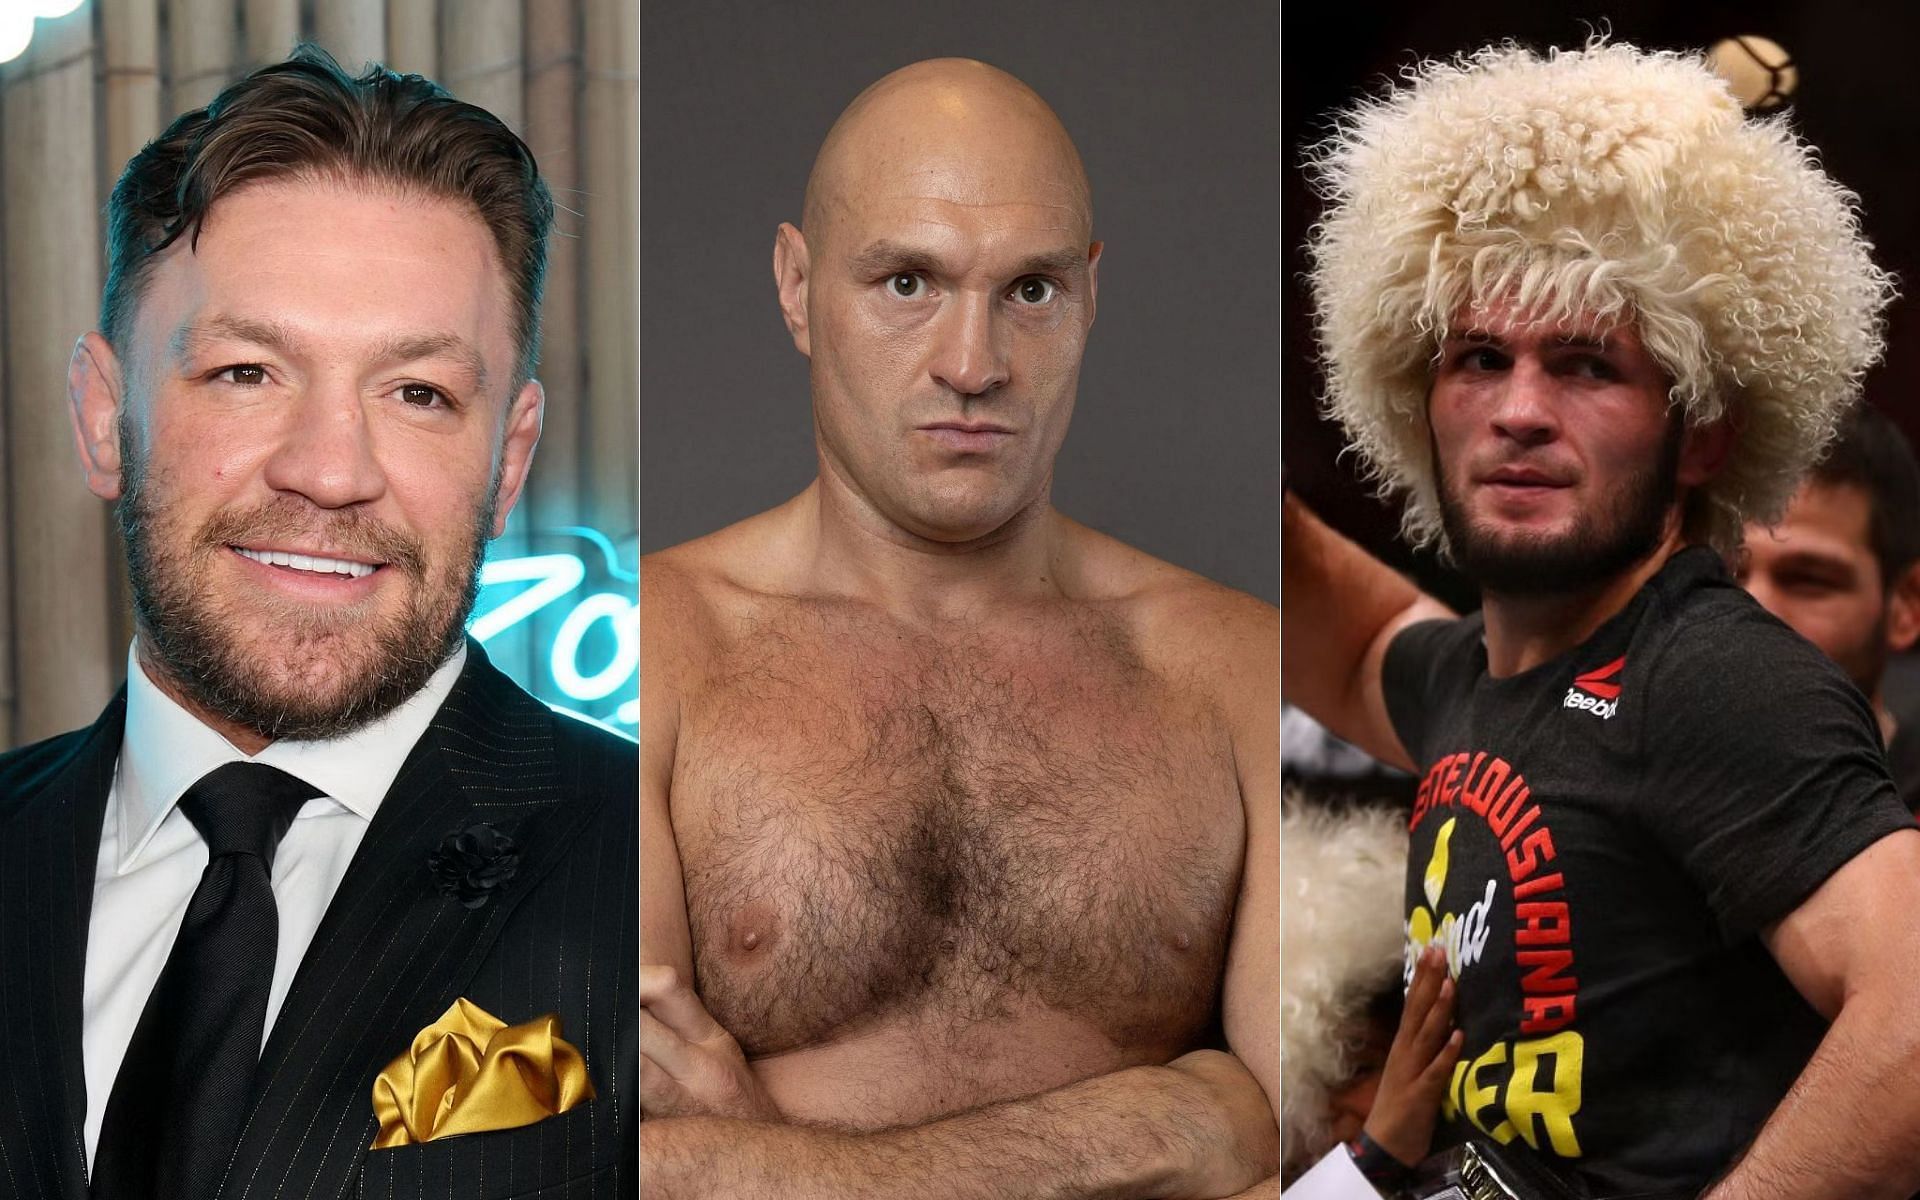 Conor McGregor (left) and Tyson Fury (middle) once got into an argument over Khabib Nurmagomedov [Images via Getty]